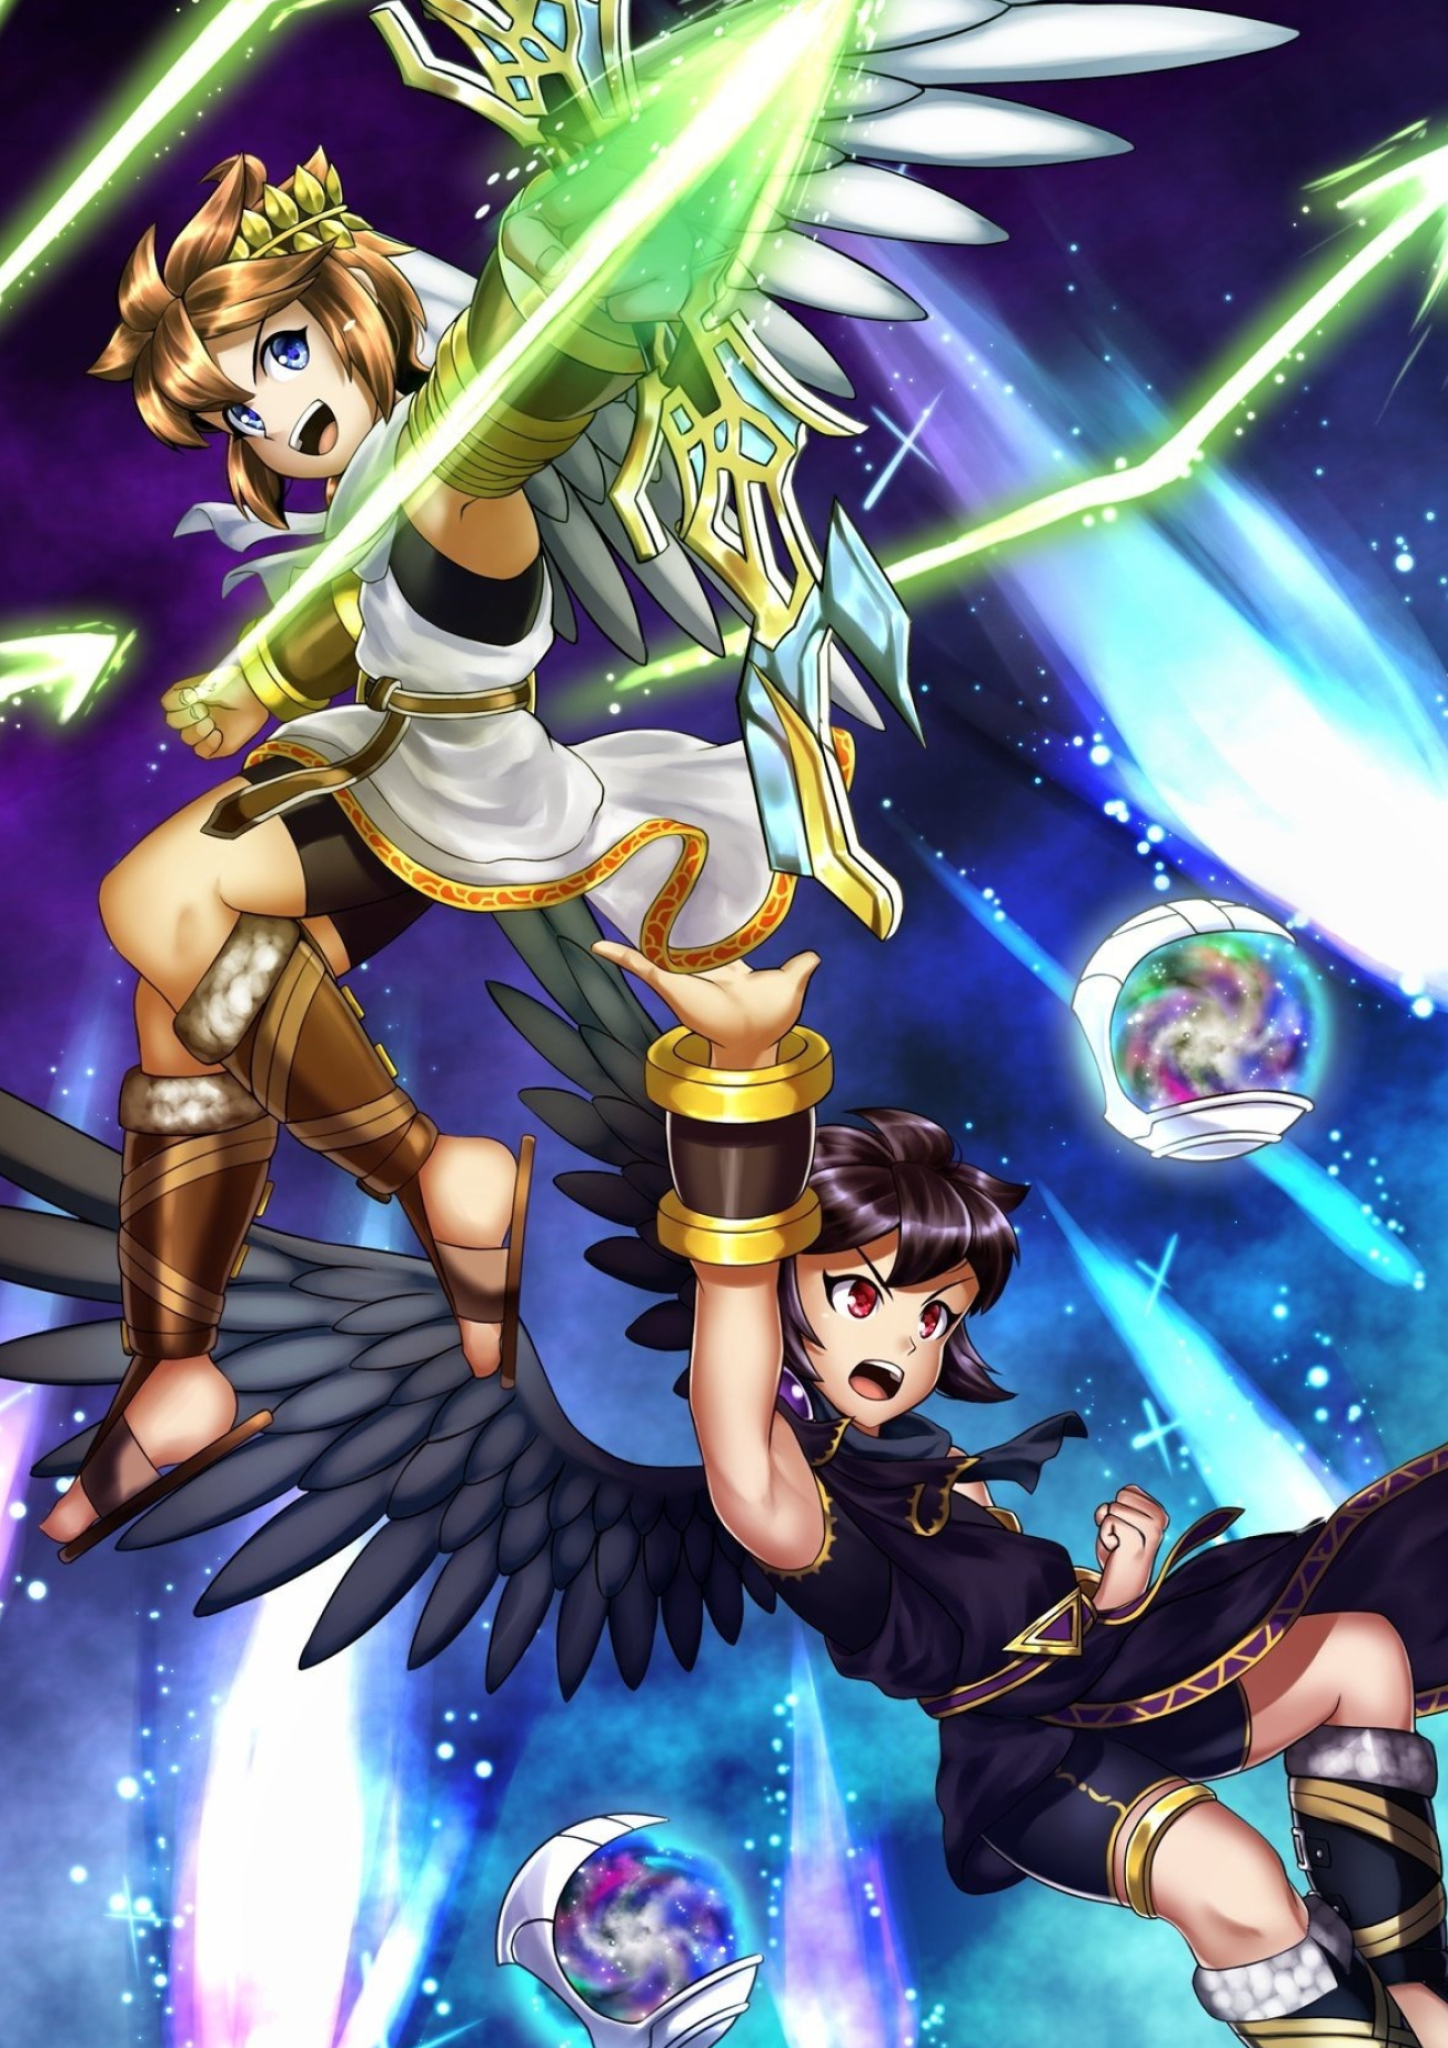 Kid Icarus Uprising art, Detailed character designs, Stunning visuals, Artistic talent, 1450x2050 HD Handy